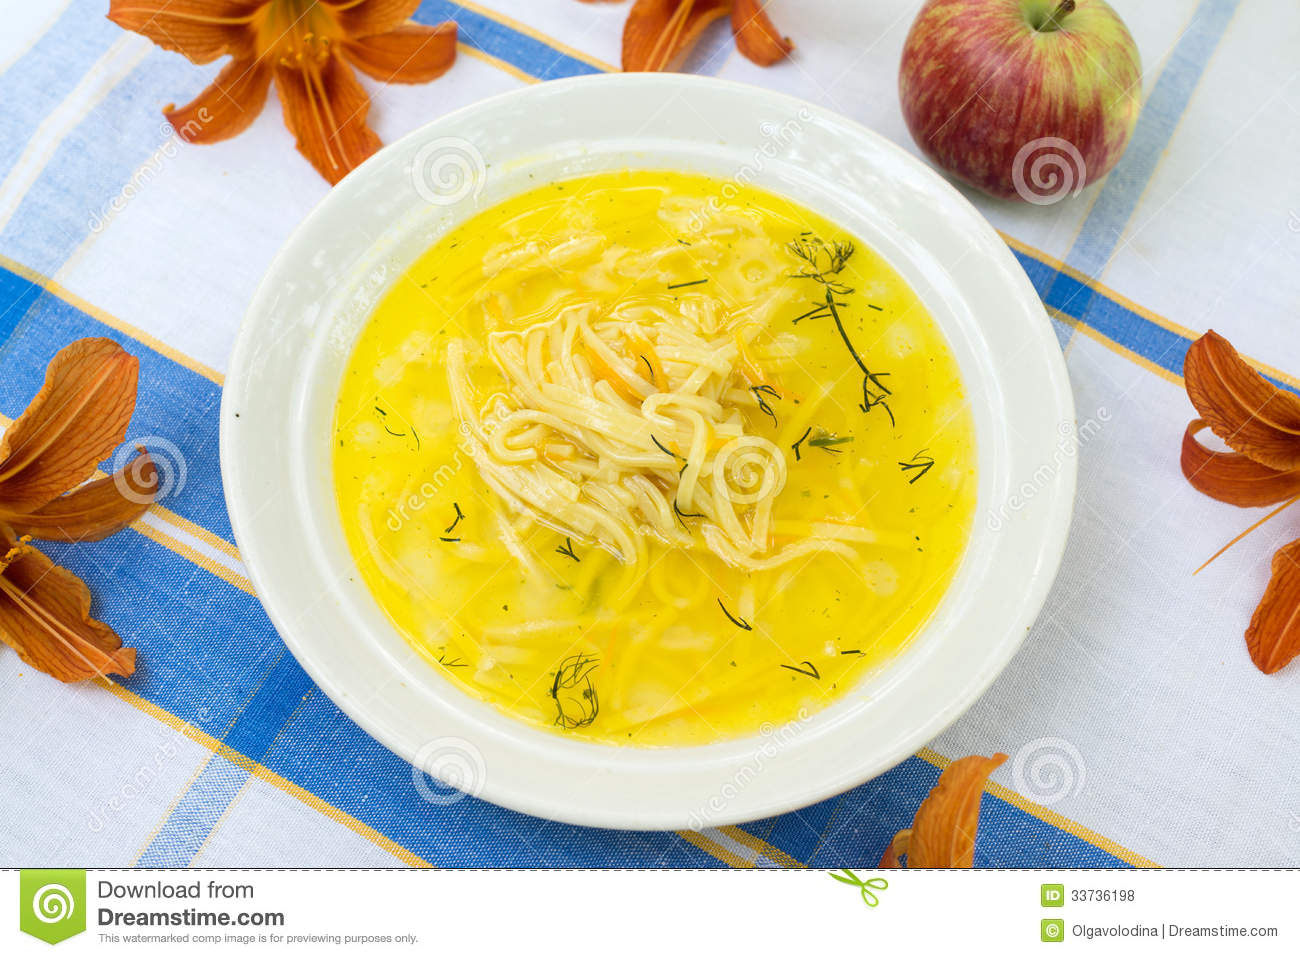 Appetizing Noodles In Chicken Broth Royalty Free Stock Photos   Image    